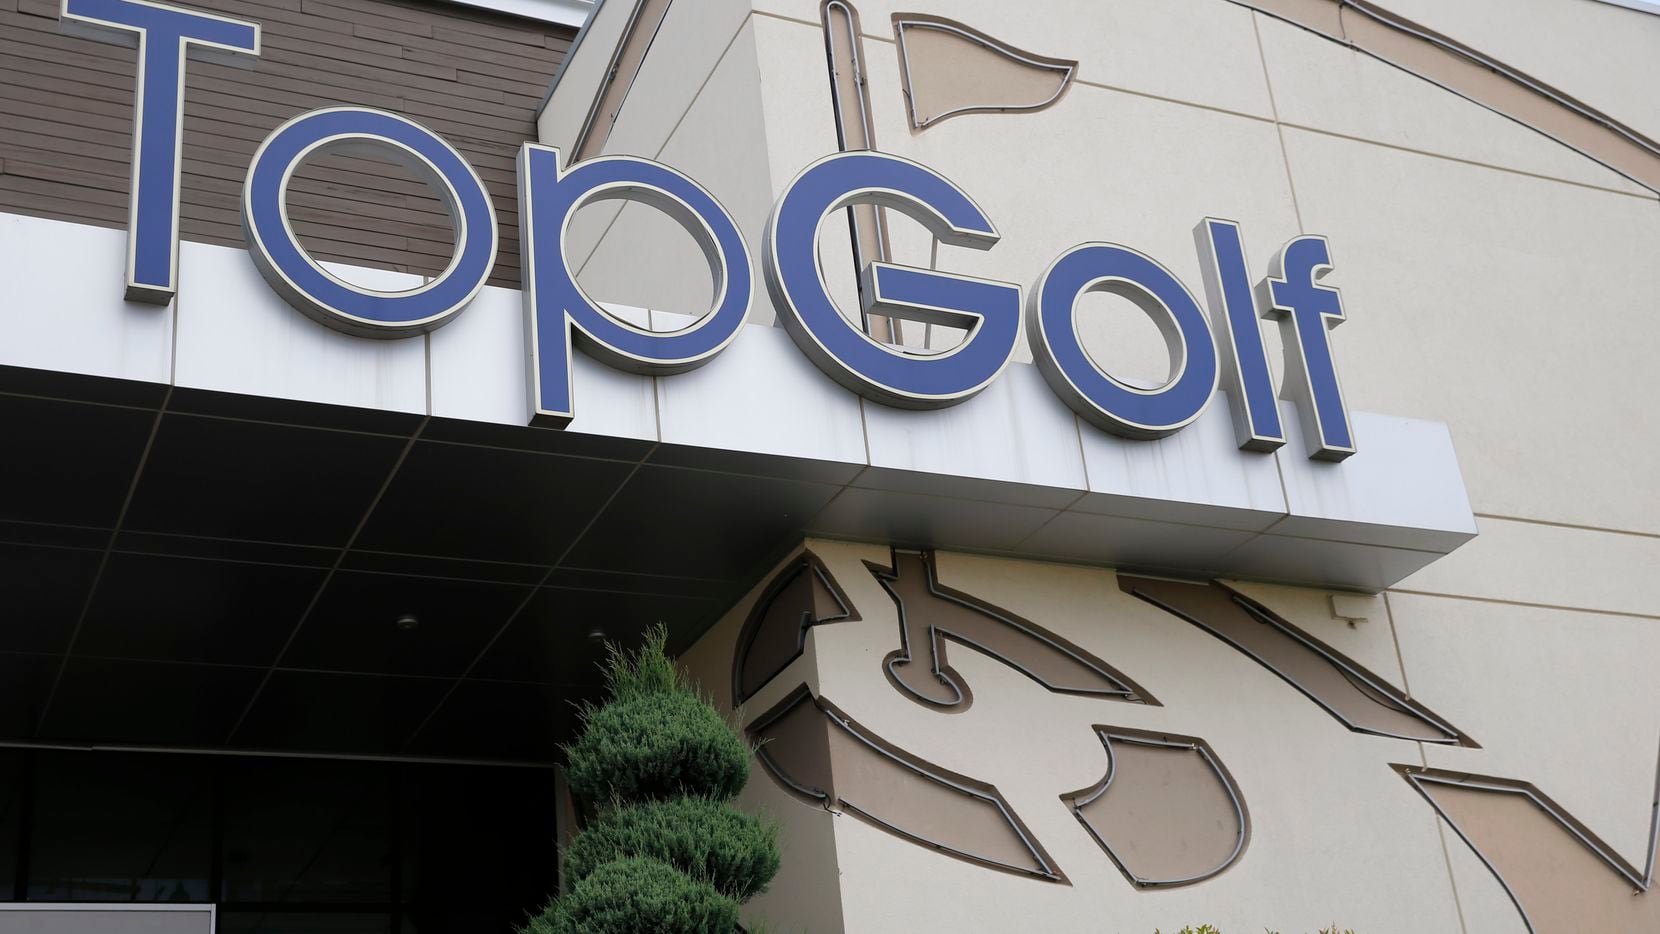 The popular Topgolf chain earlier this year had a $4 billion valuation on its prospective IPO.